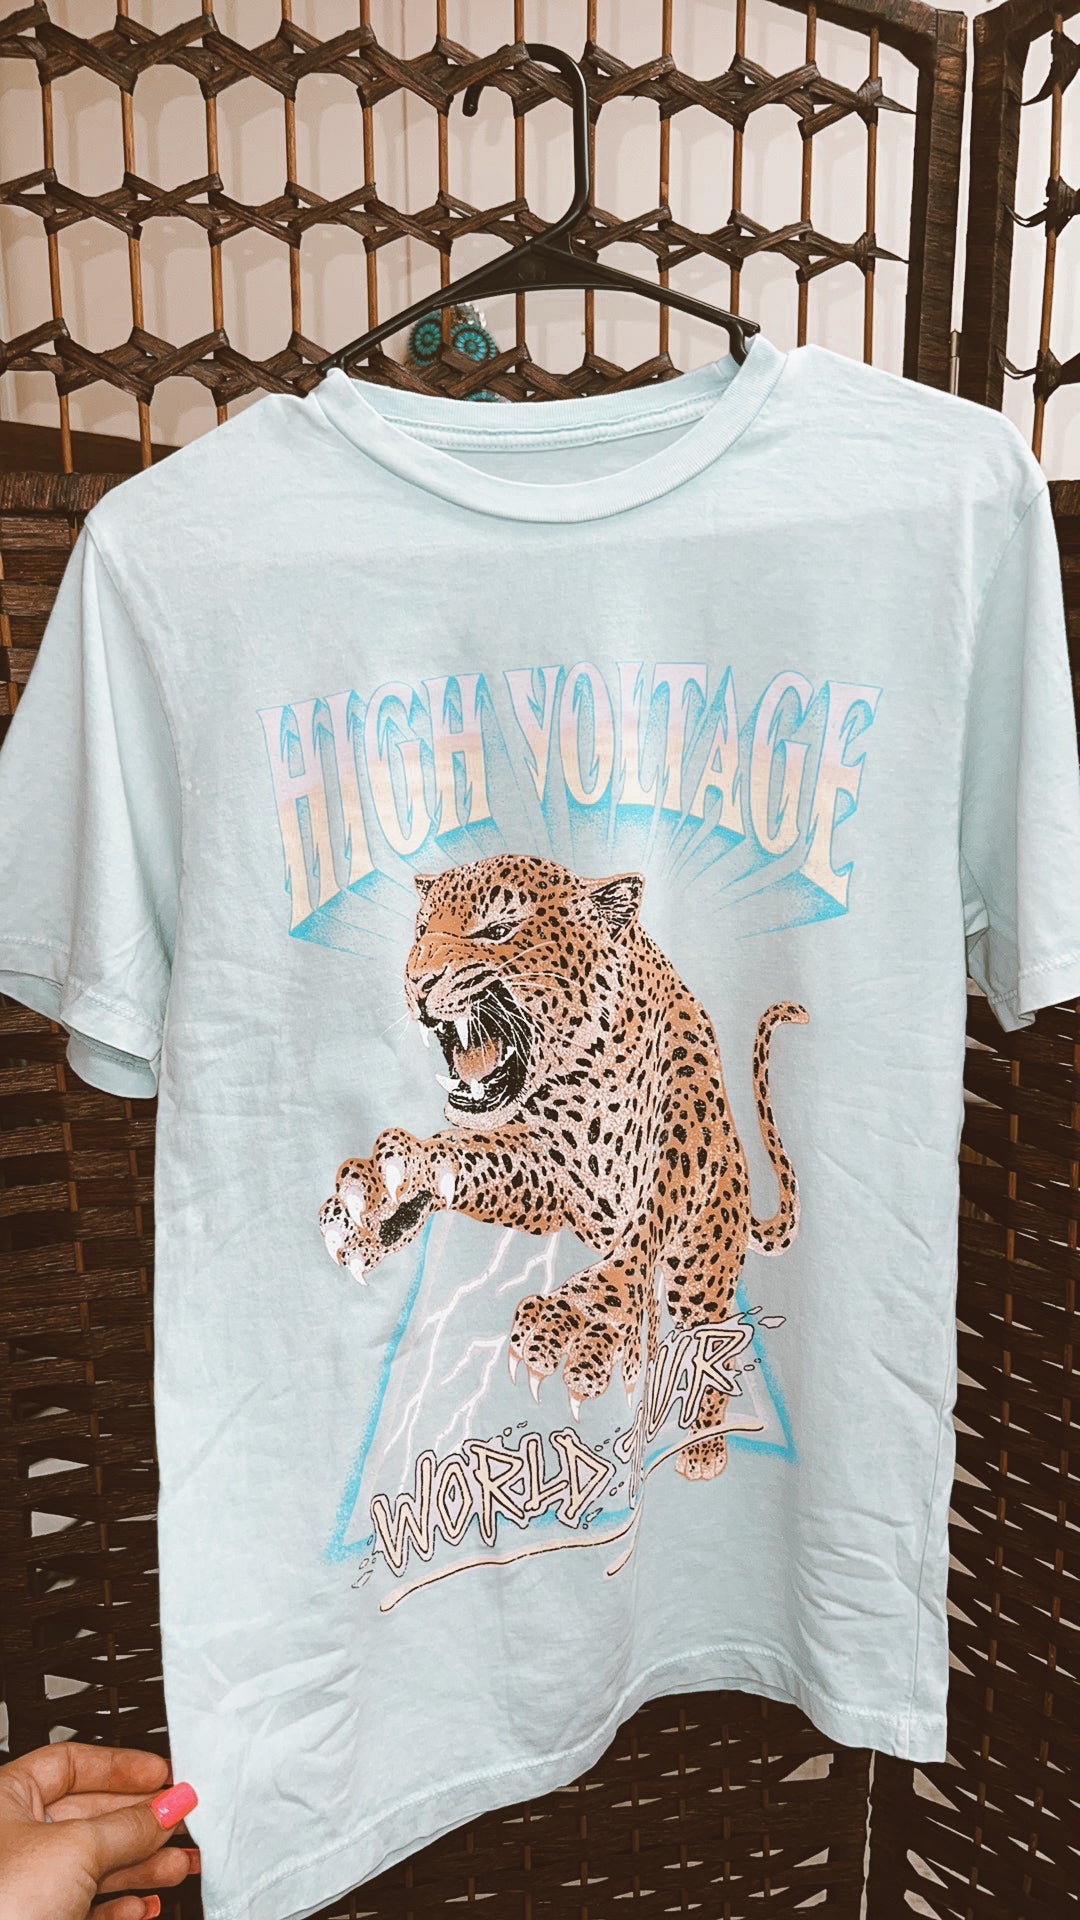 Mint Graphic Tee High Voltage Turquoise Traveler 